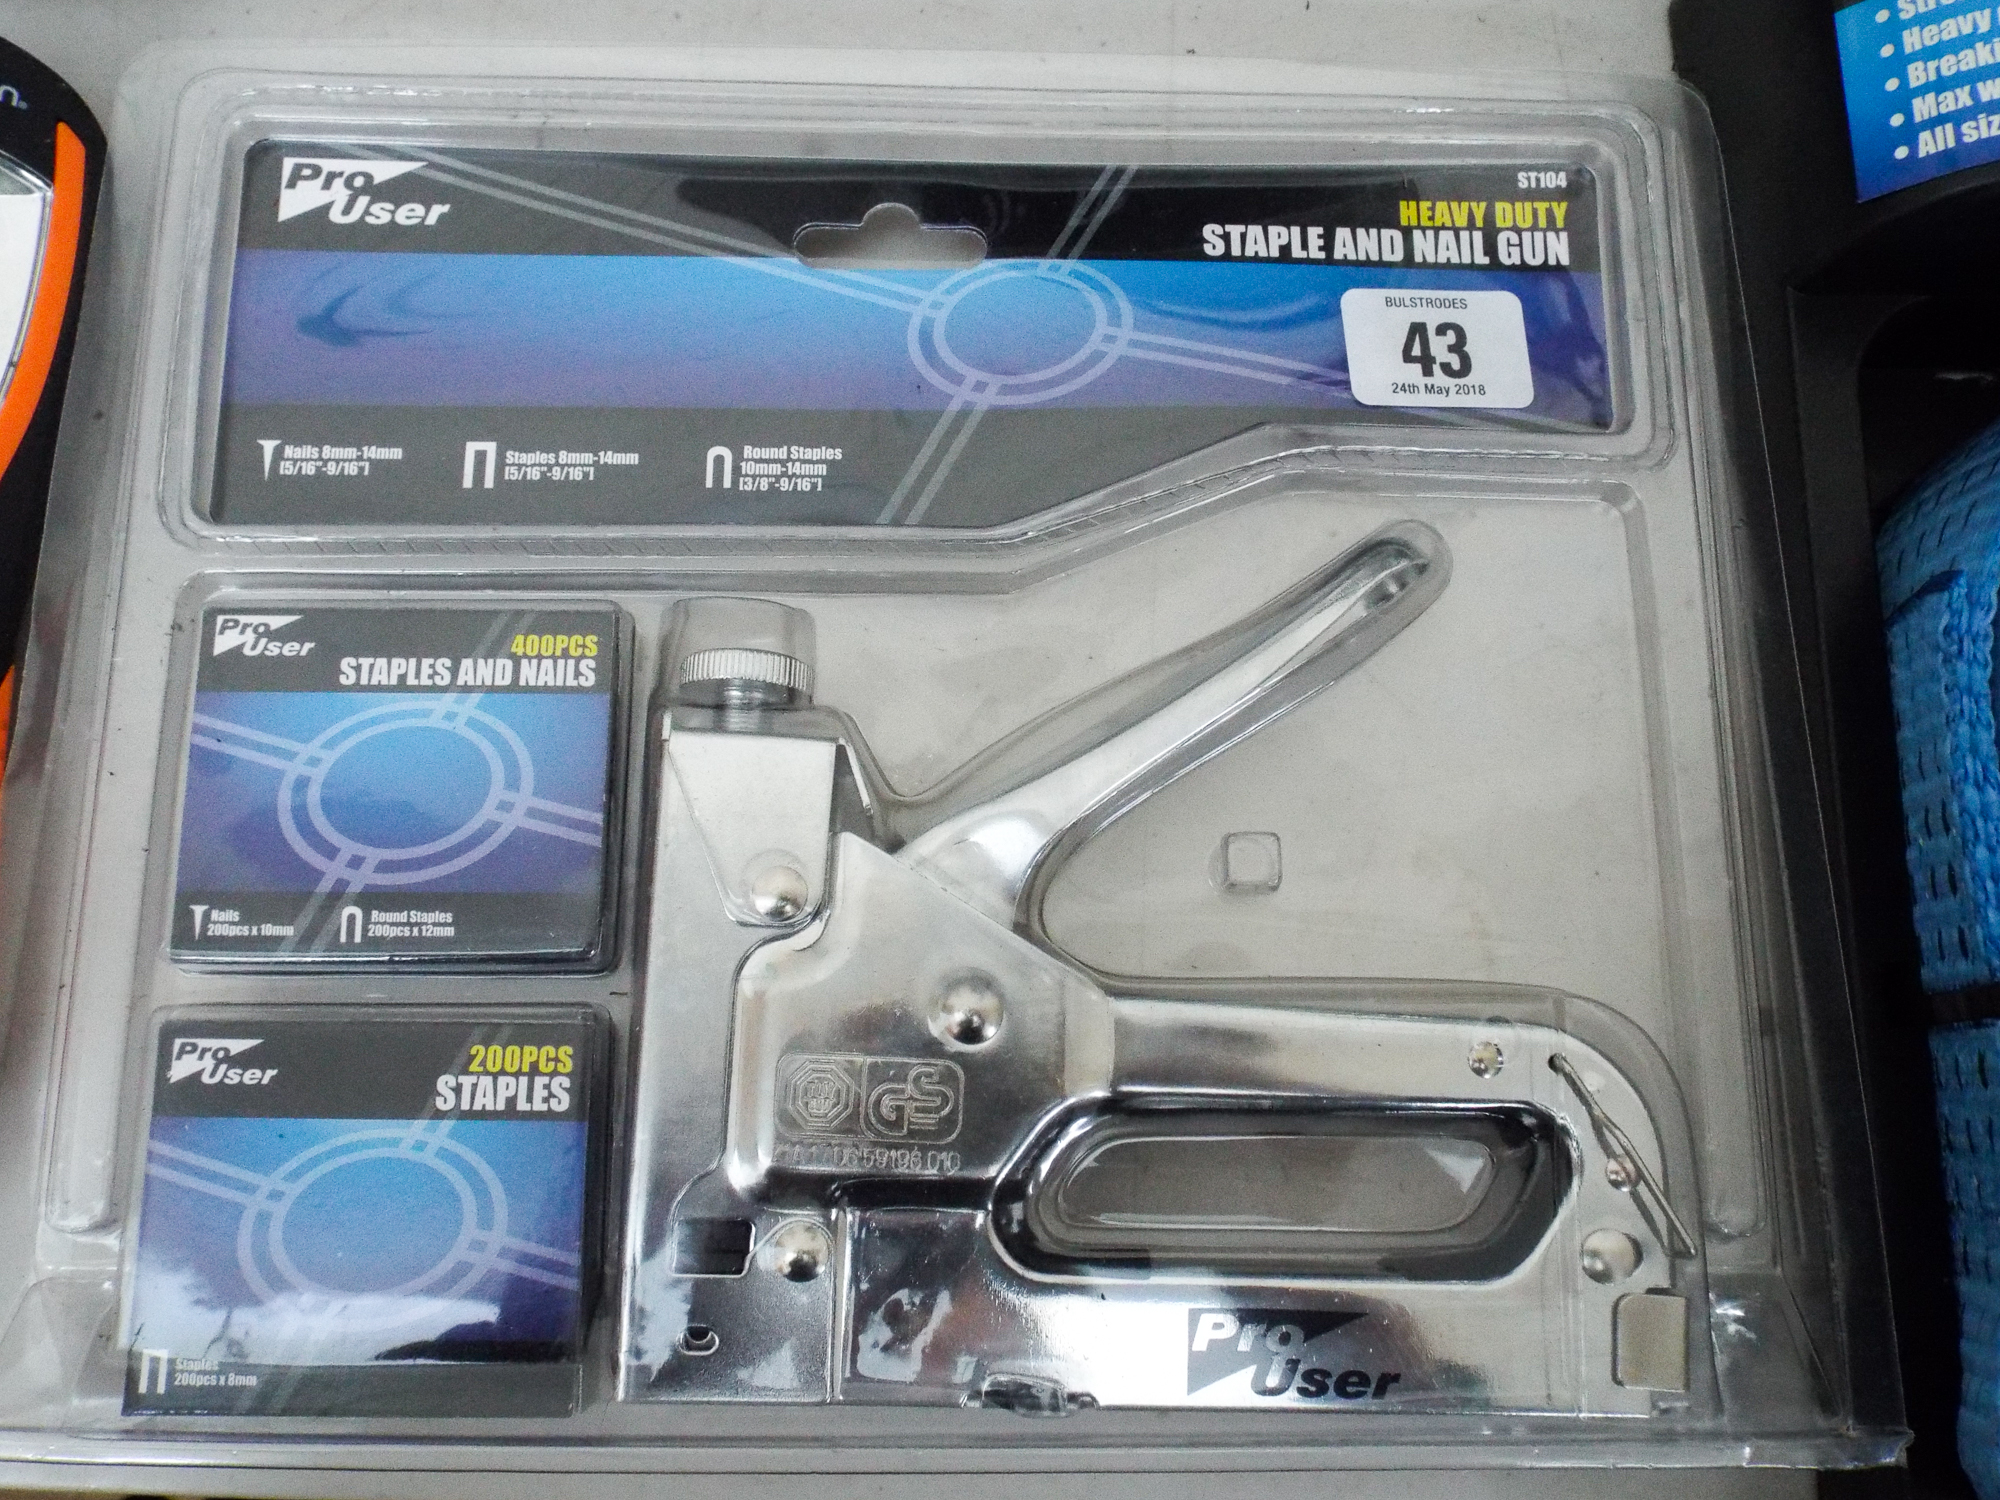 A new heavy duty staple gun with accessories